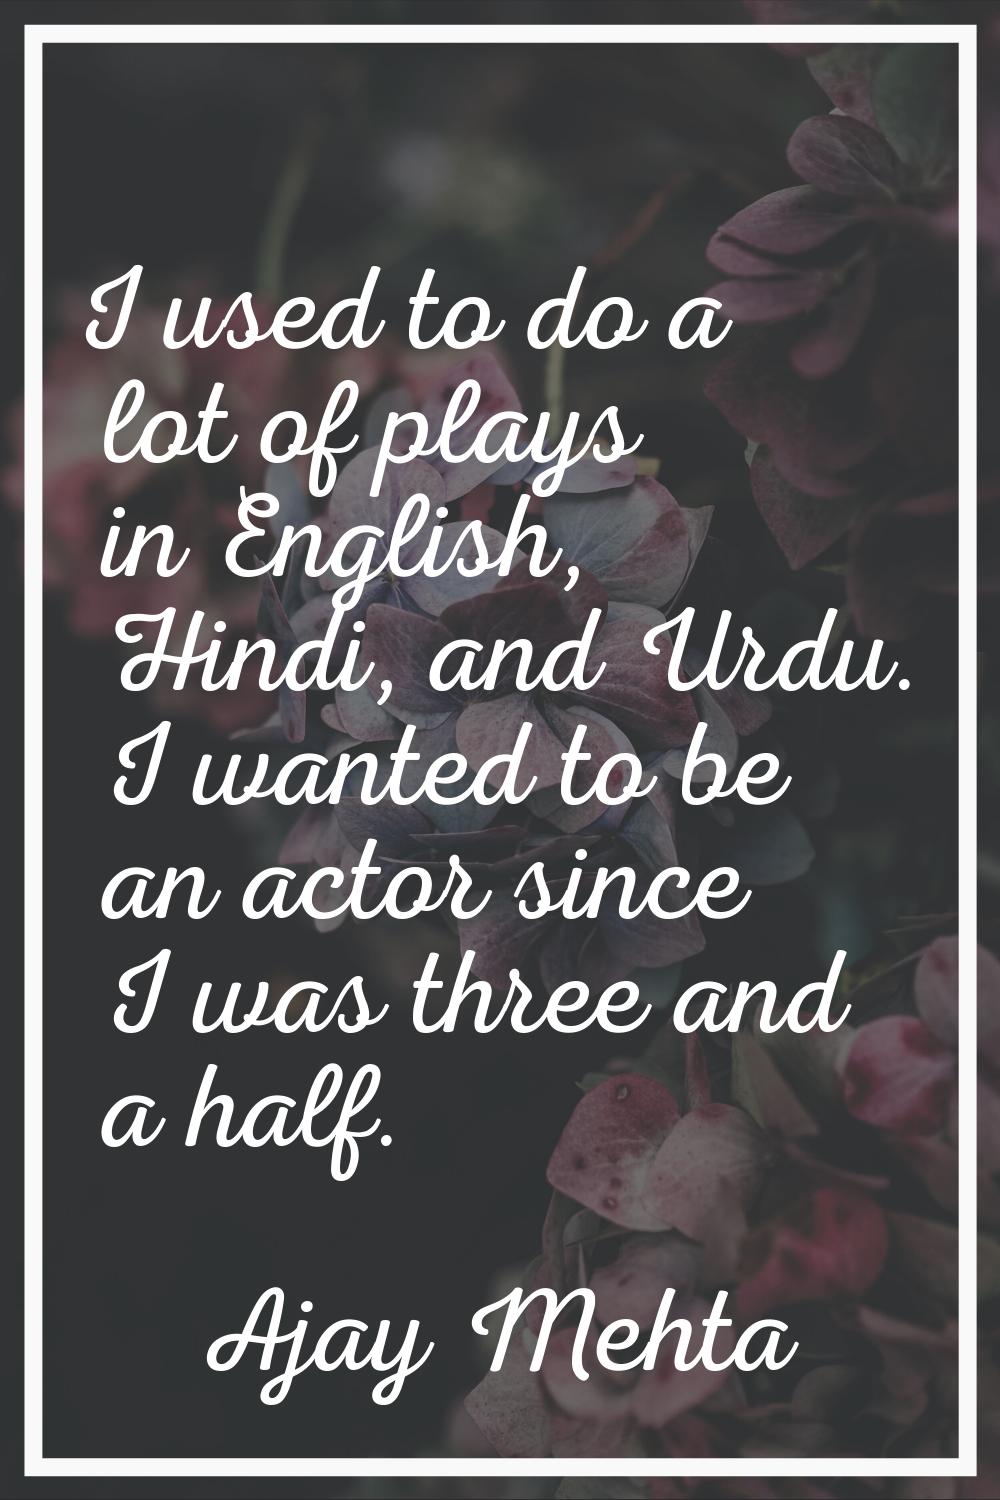 I used to do a lot of plays in English, Hindi, and Urdu. I wanted to be an actor since I was three 